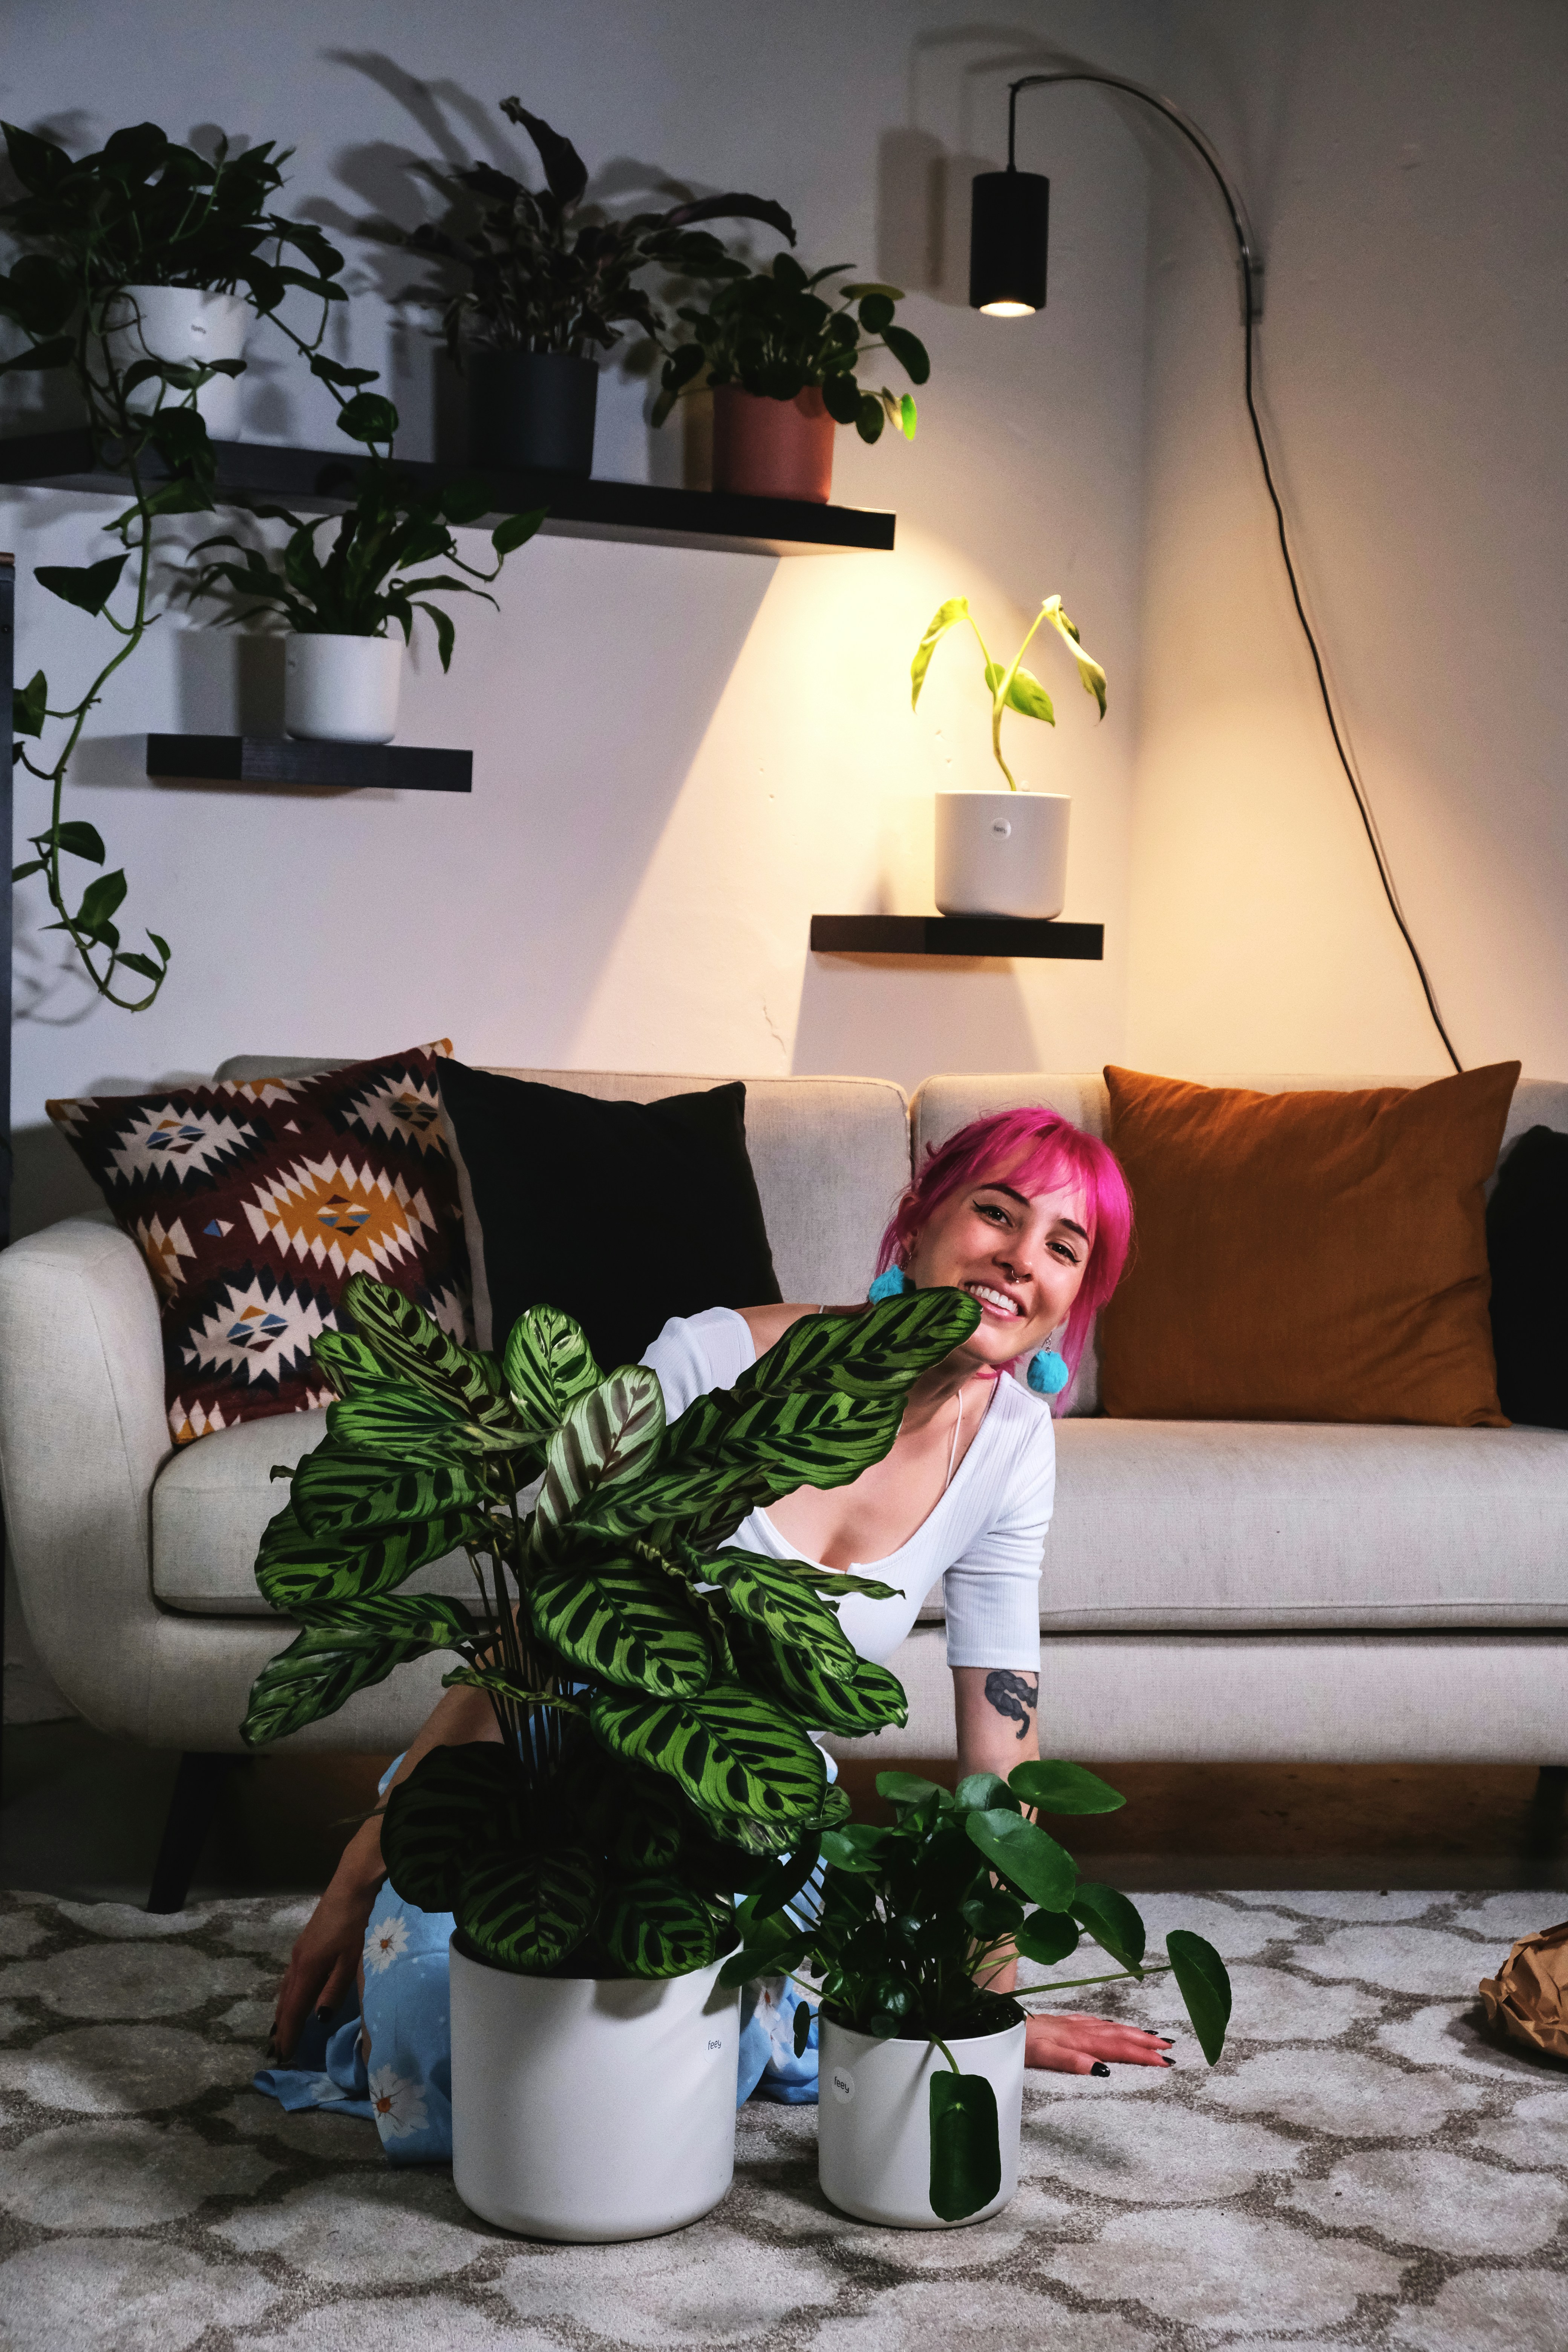 Woman with pink hair sitting on the floor behind two feey plants